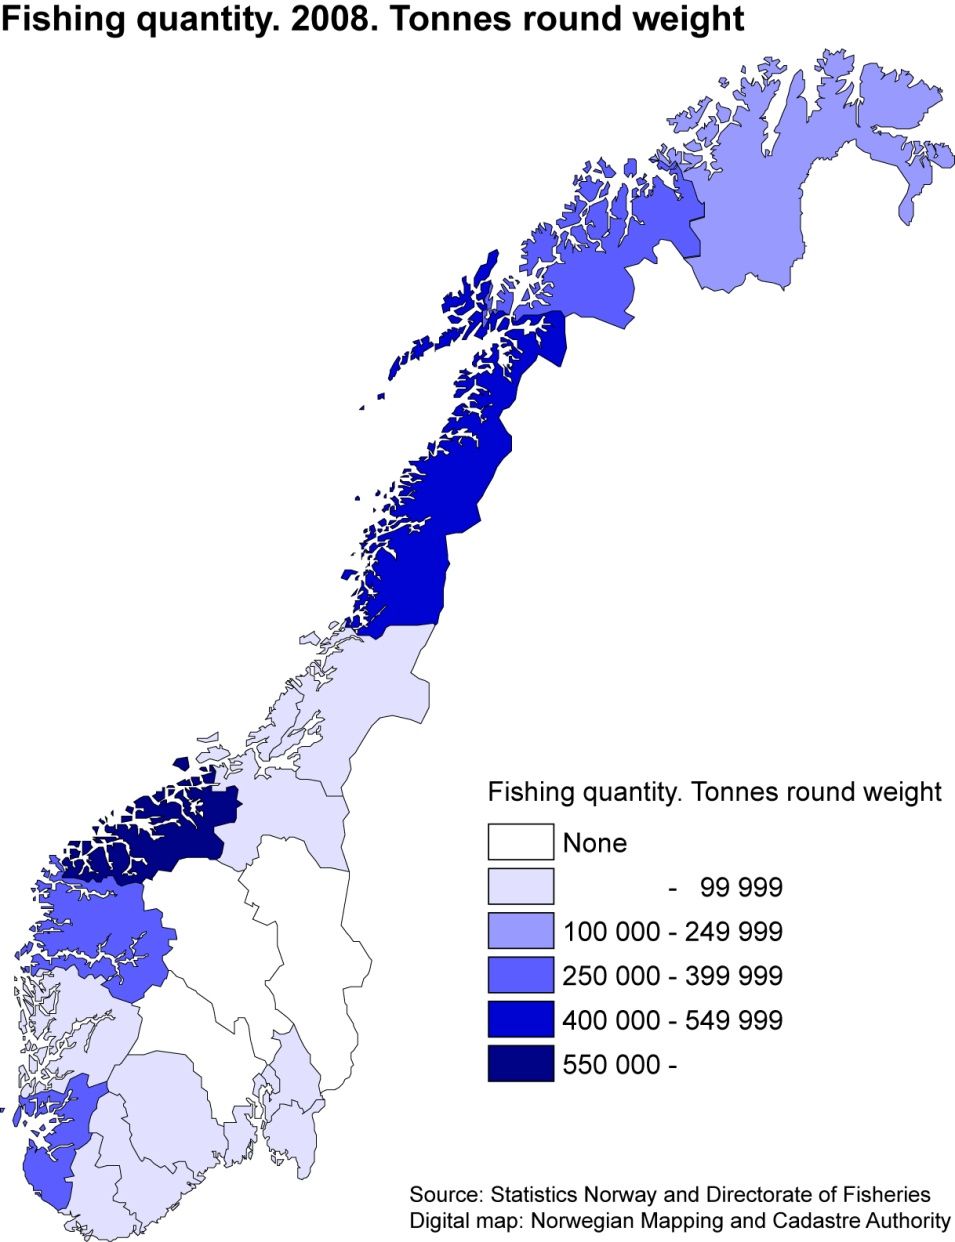 Fisheries and Aquaculture - Fishery and Aquaculture Country Profiles